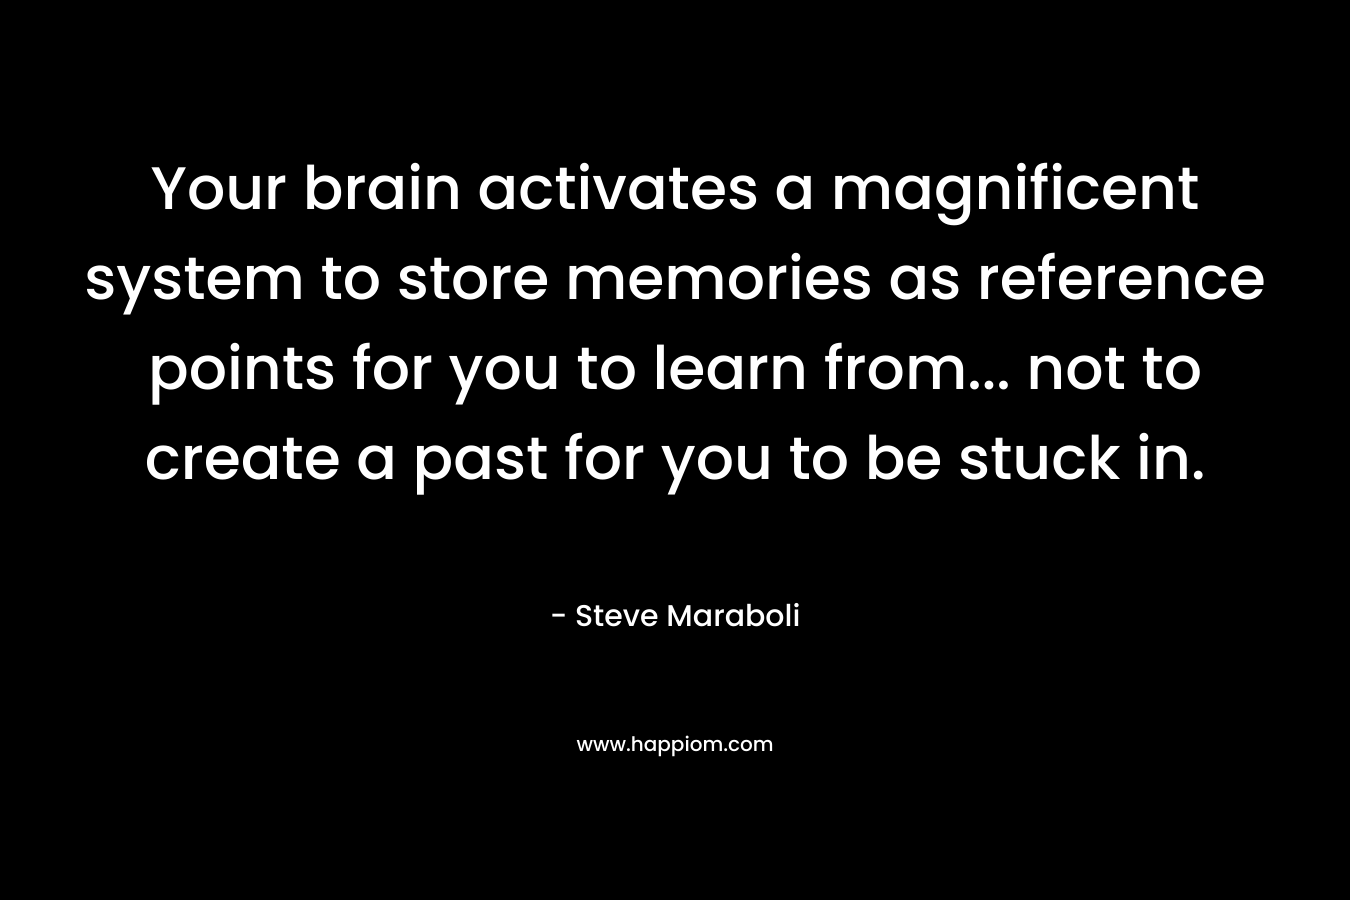 Your brain activates a magnificent system to store memories as reference points for you to learn from... not to create a past for you to be stuck in.